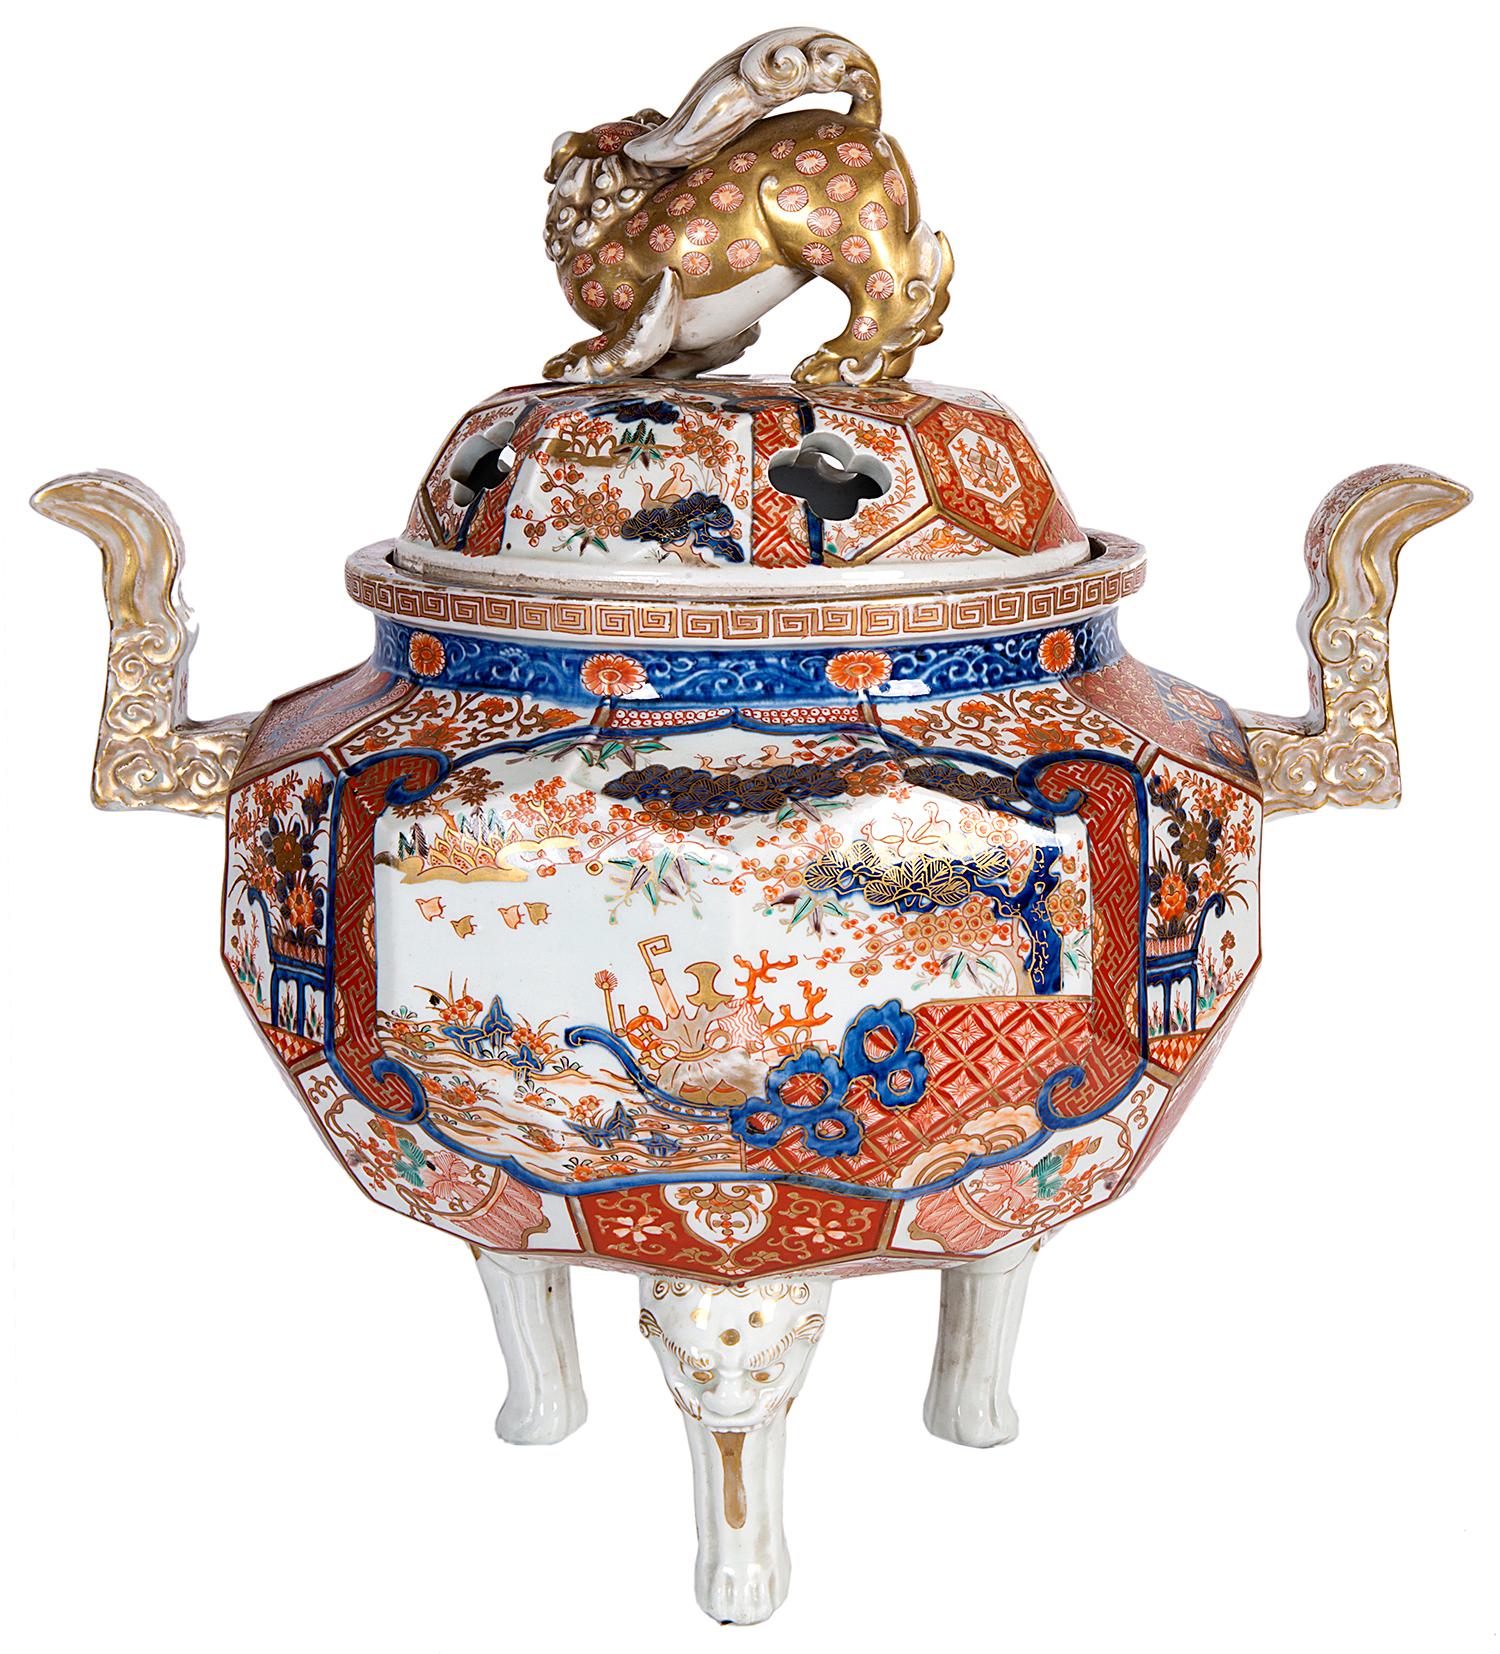 A very good quality 19th century Japanese Imari Koro, having a wonderful gilded dog of faux finial, stylized handles on either side, faceted panels with various scenes of birds, flowers and foliage, raised on three lion mask legs.